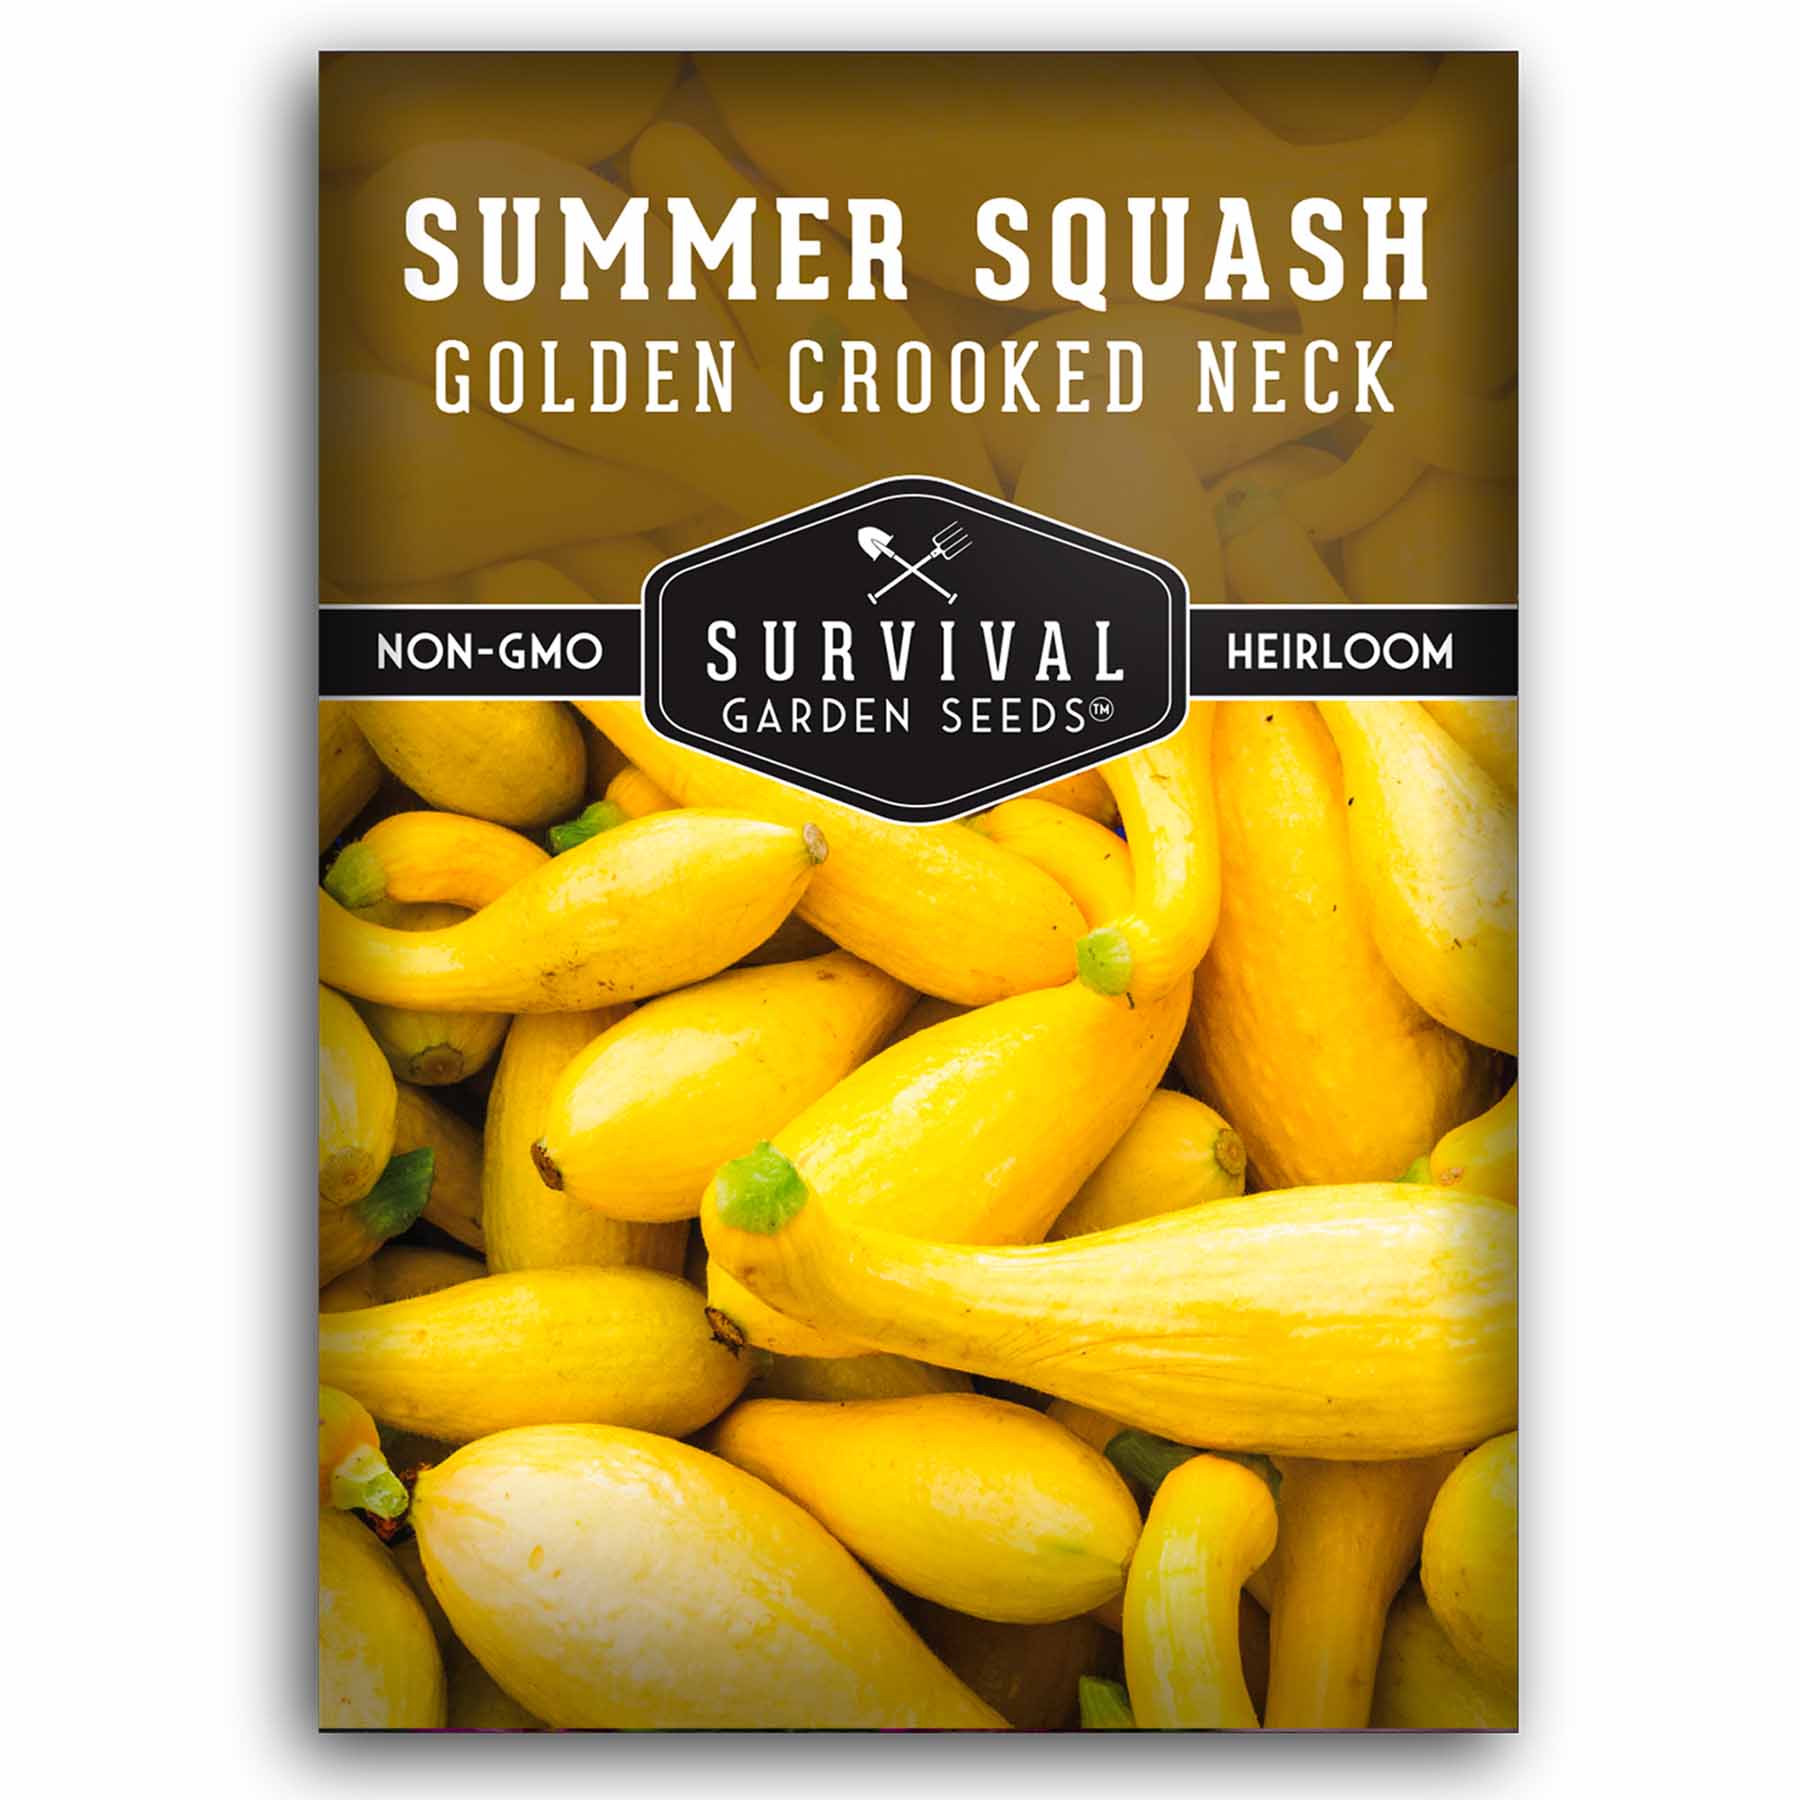 1 packet of Crooked Neck Squash seeds